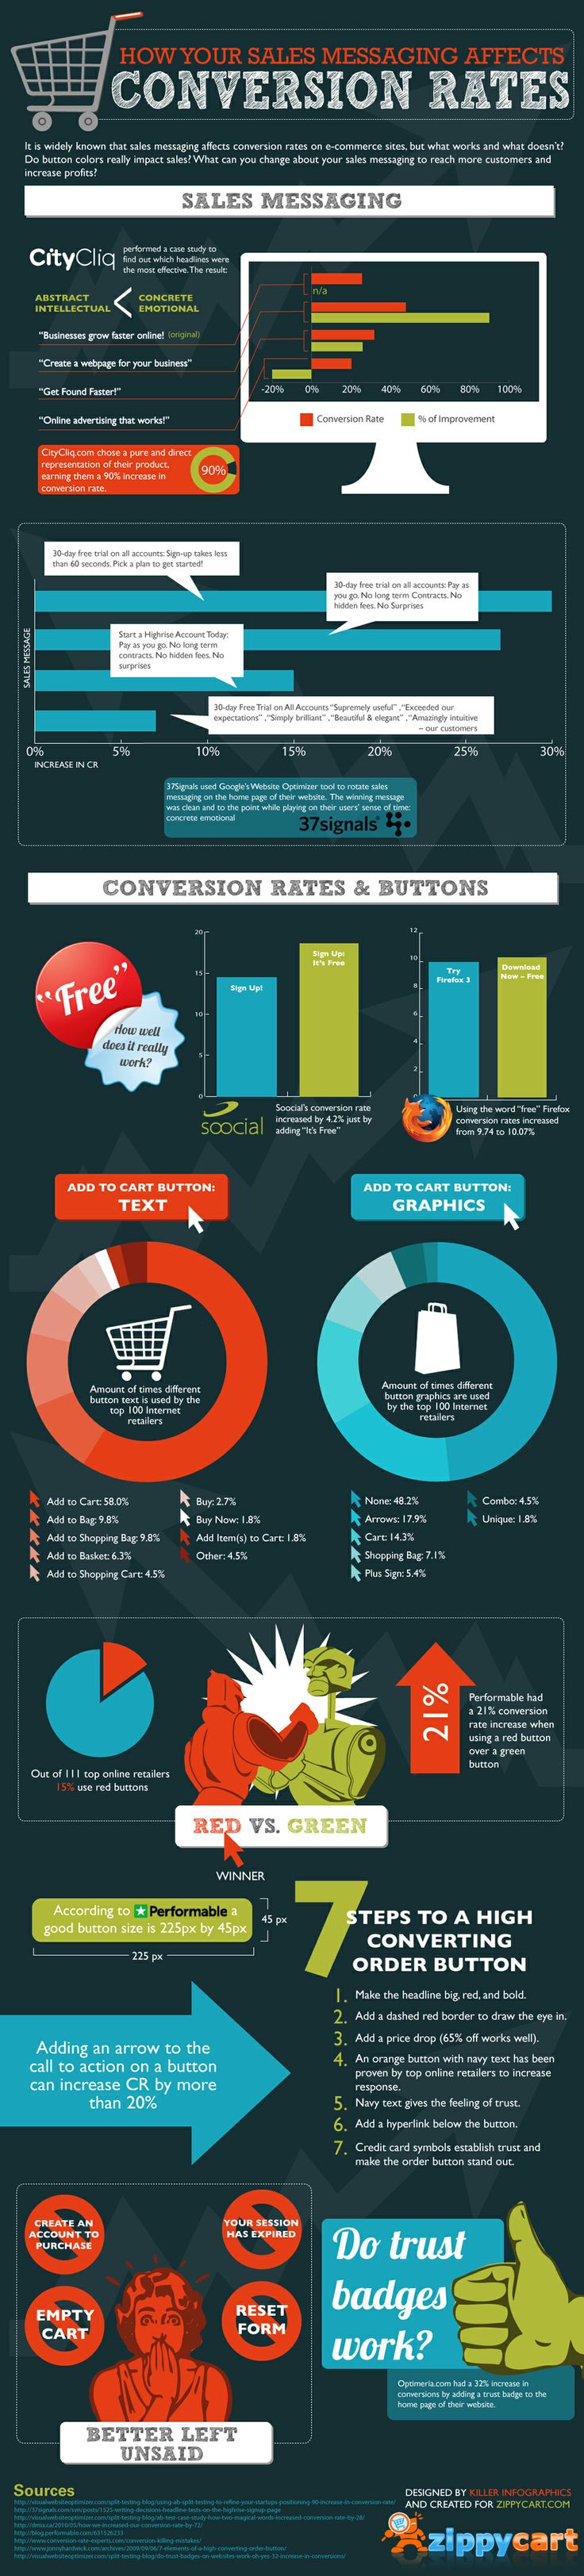 Phone sales increase conversions infographic